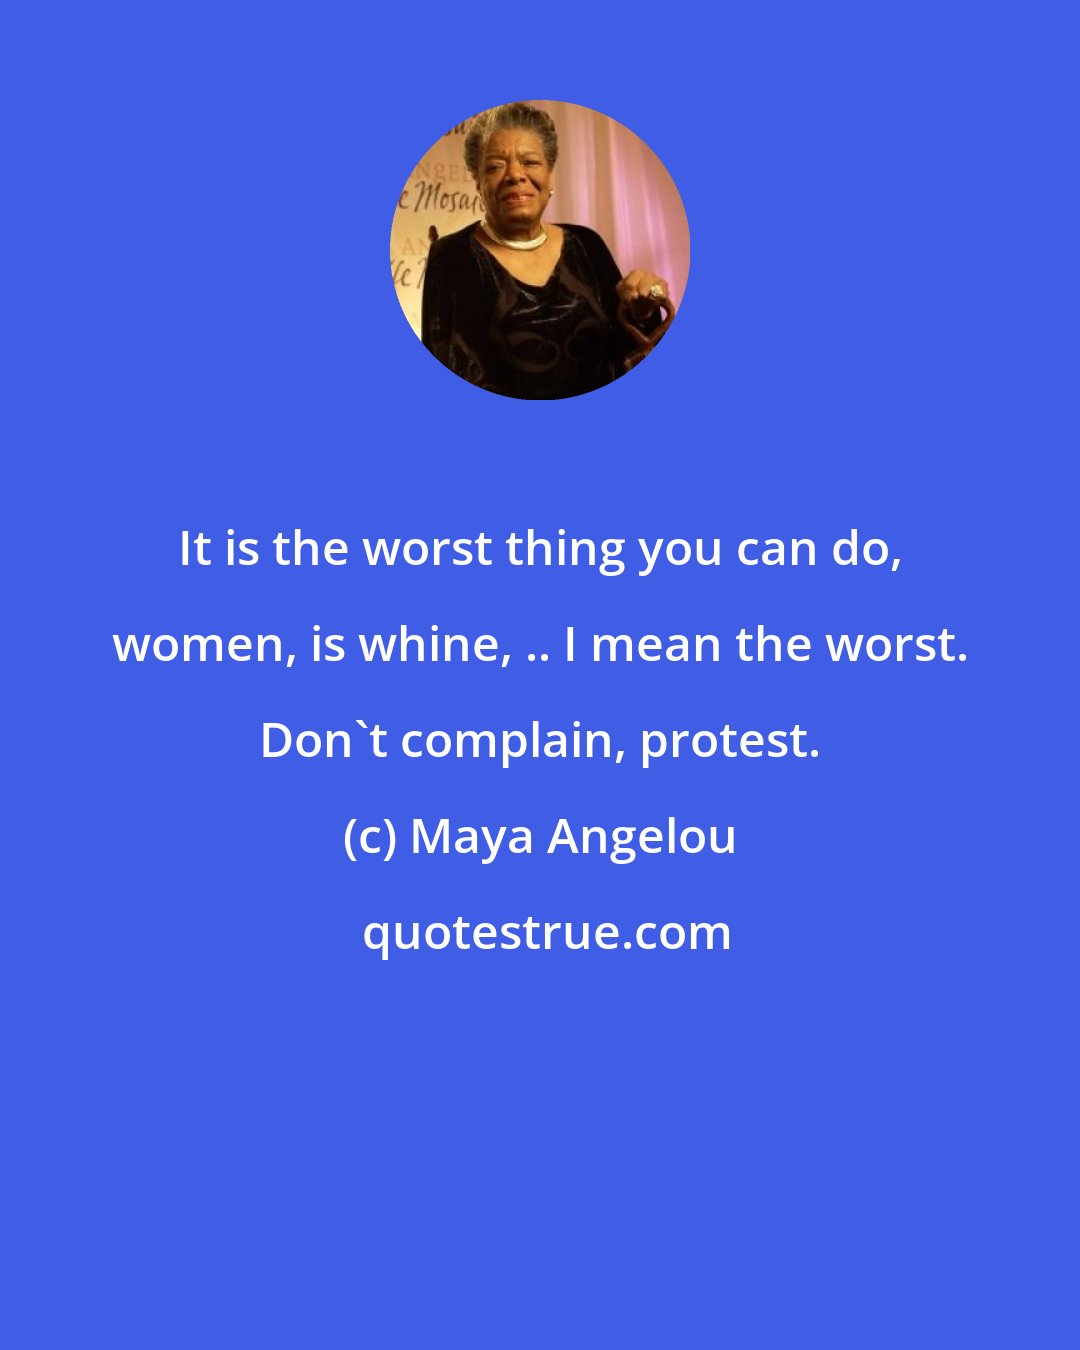 Maya Angelou: It is the worst thing you can do, women, is whine, .. I mean the worst. Don't complain, protest.